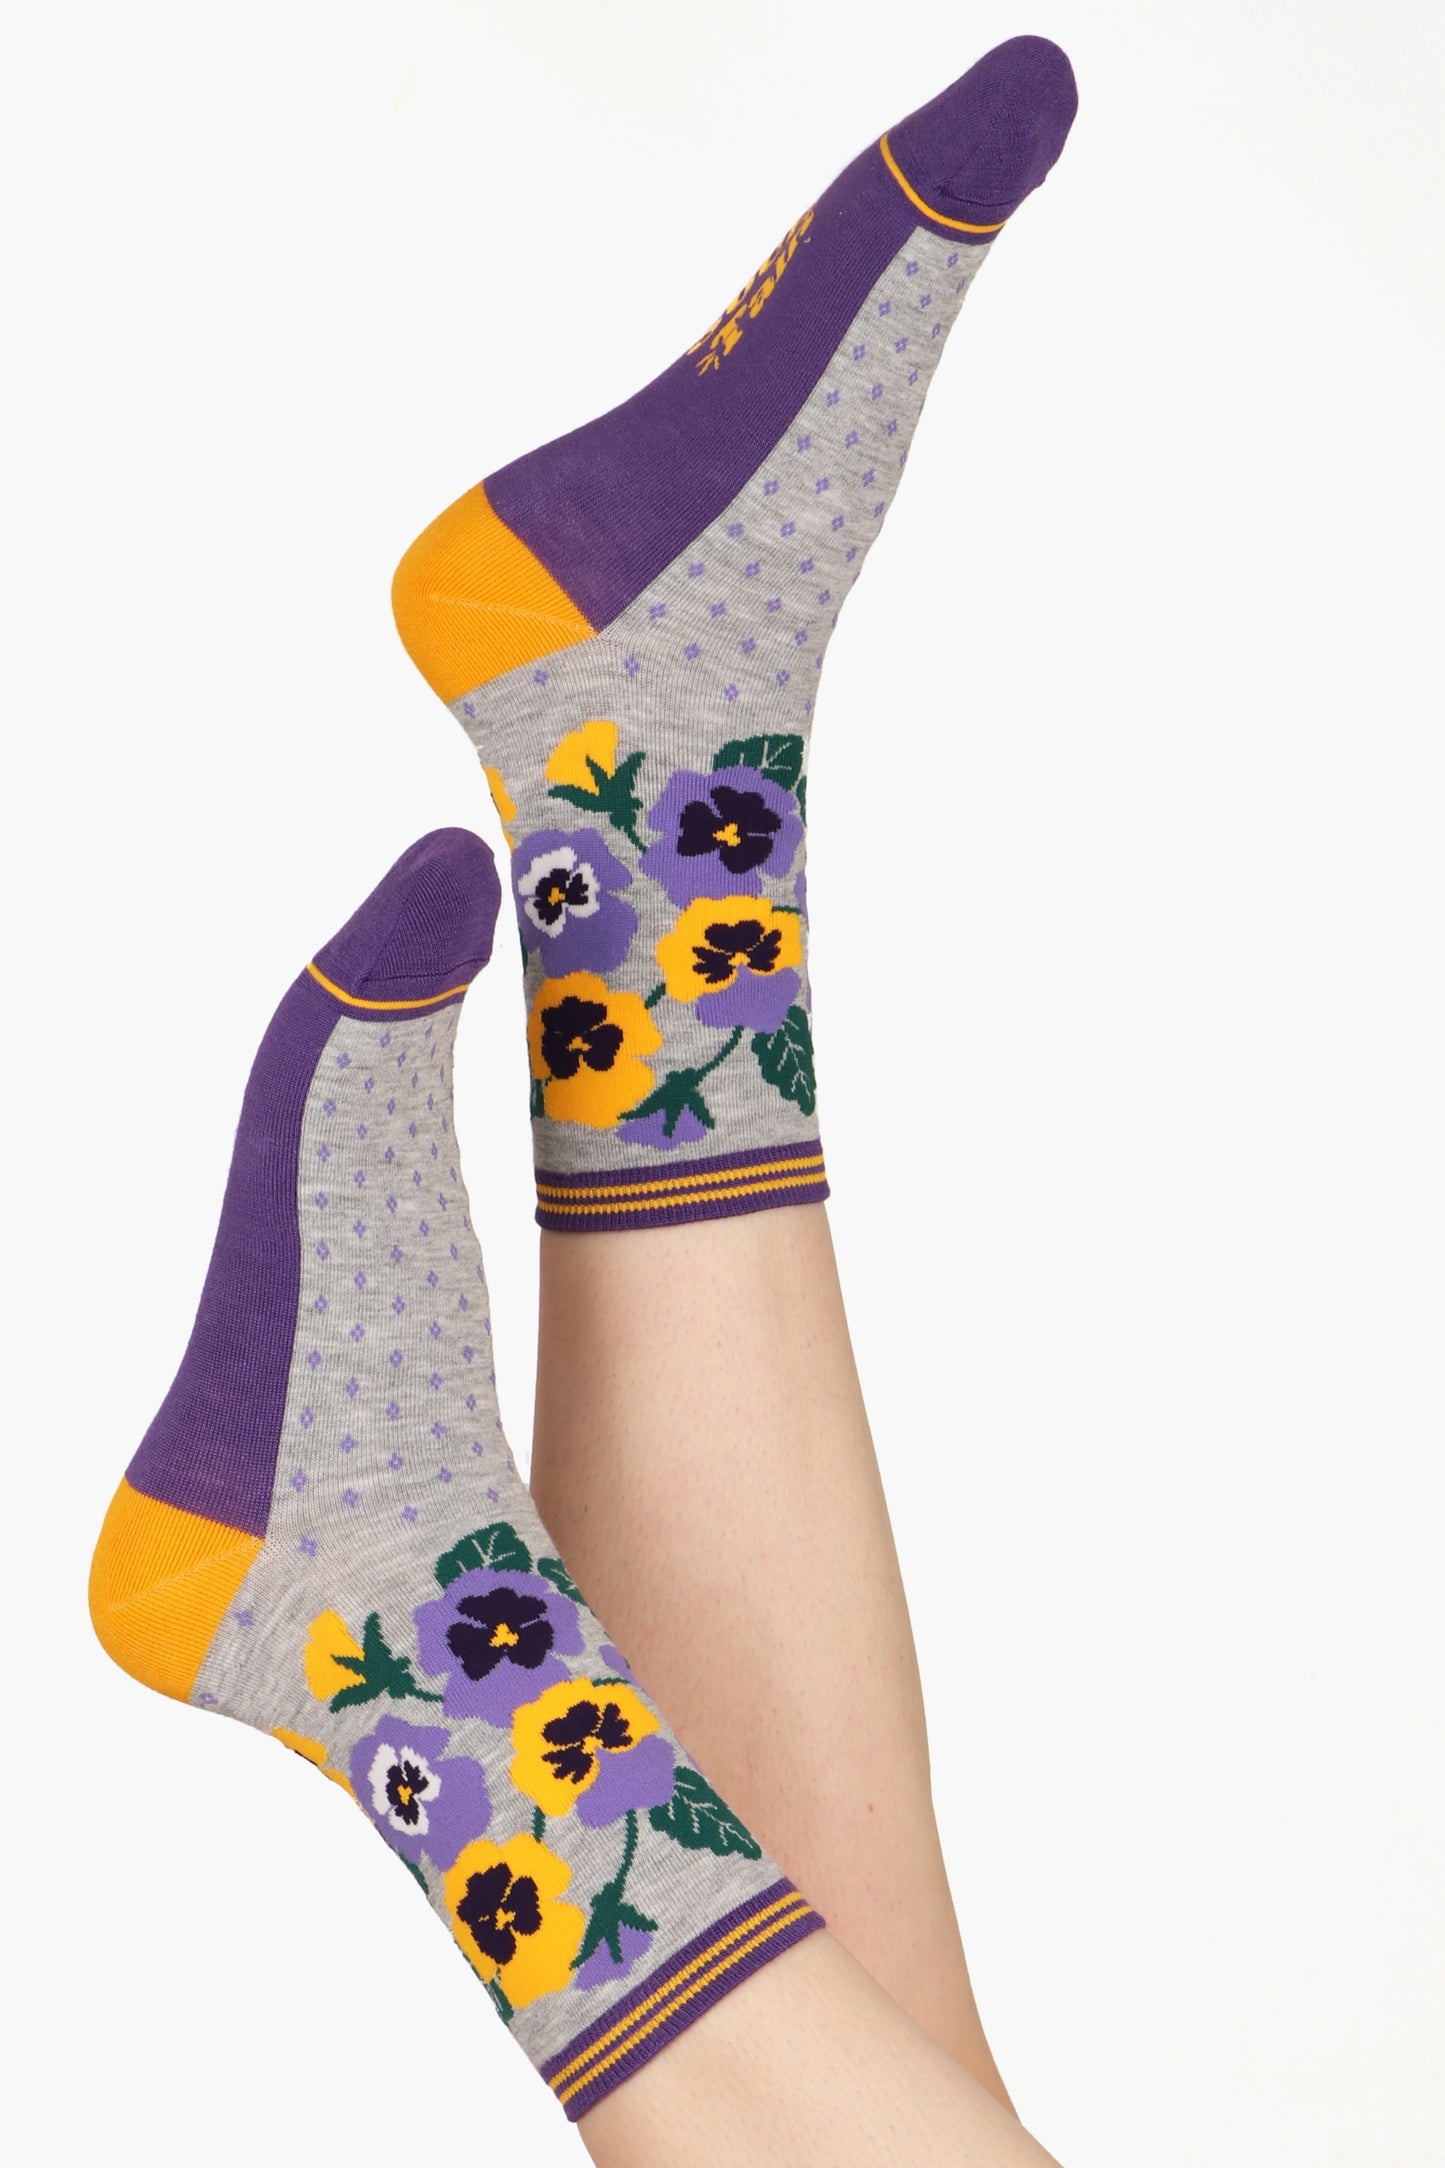 Ladies feet posed in the air wearing pansy floral print socks in grey, yellow and purple